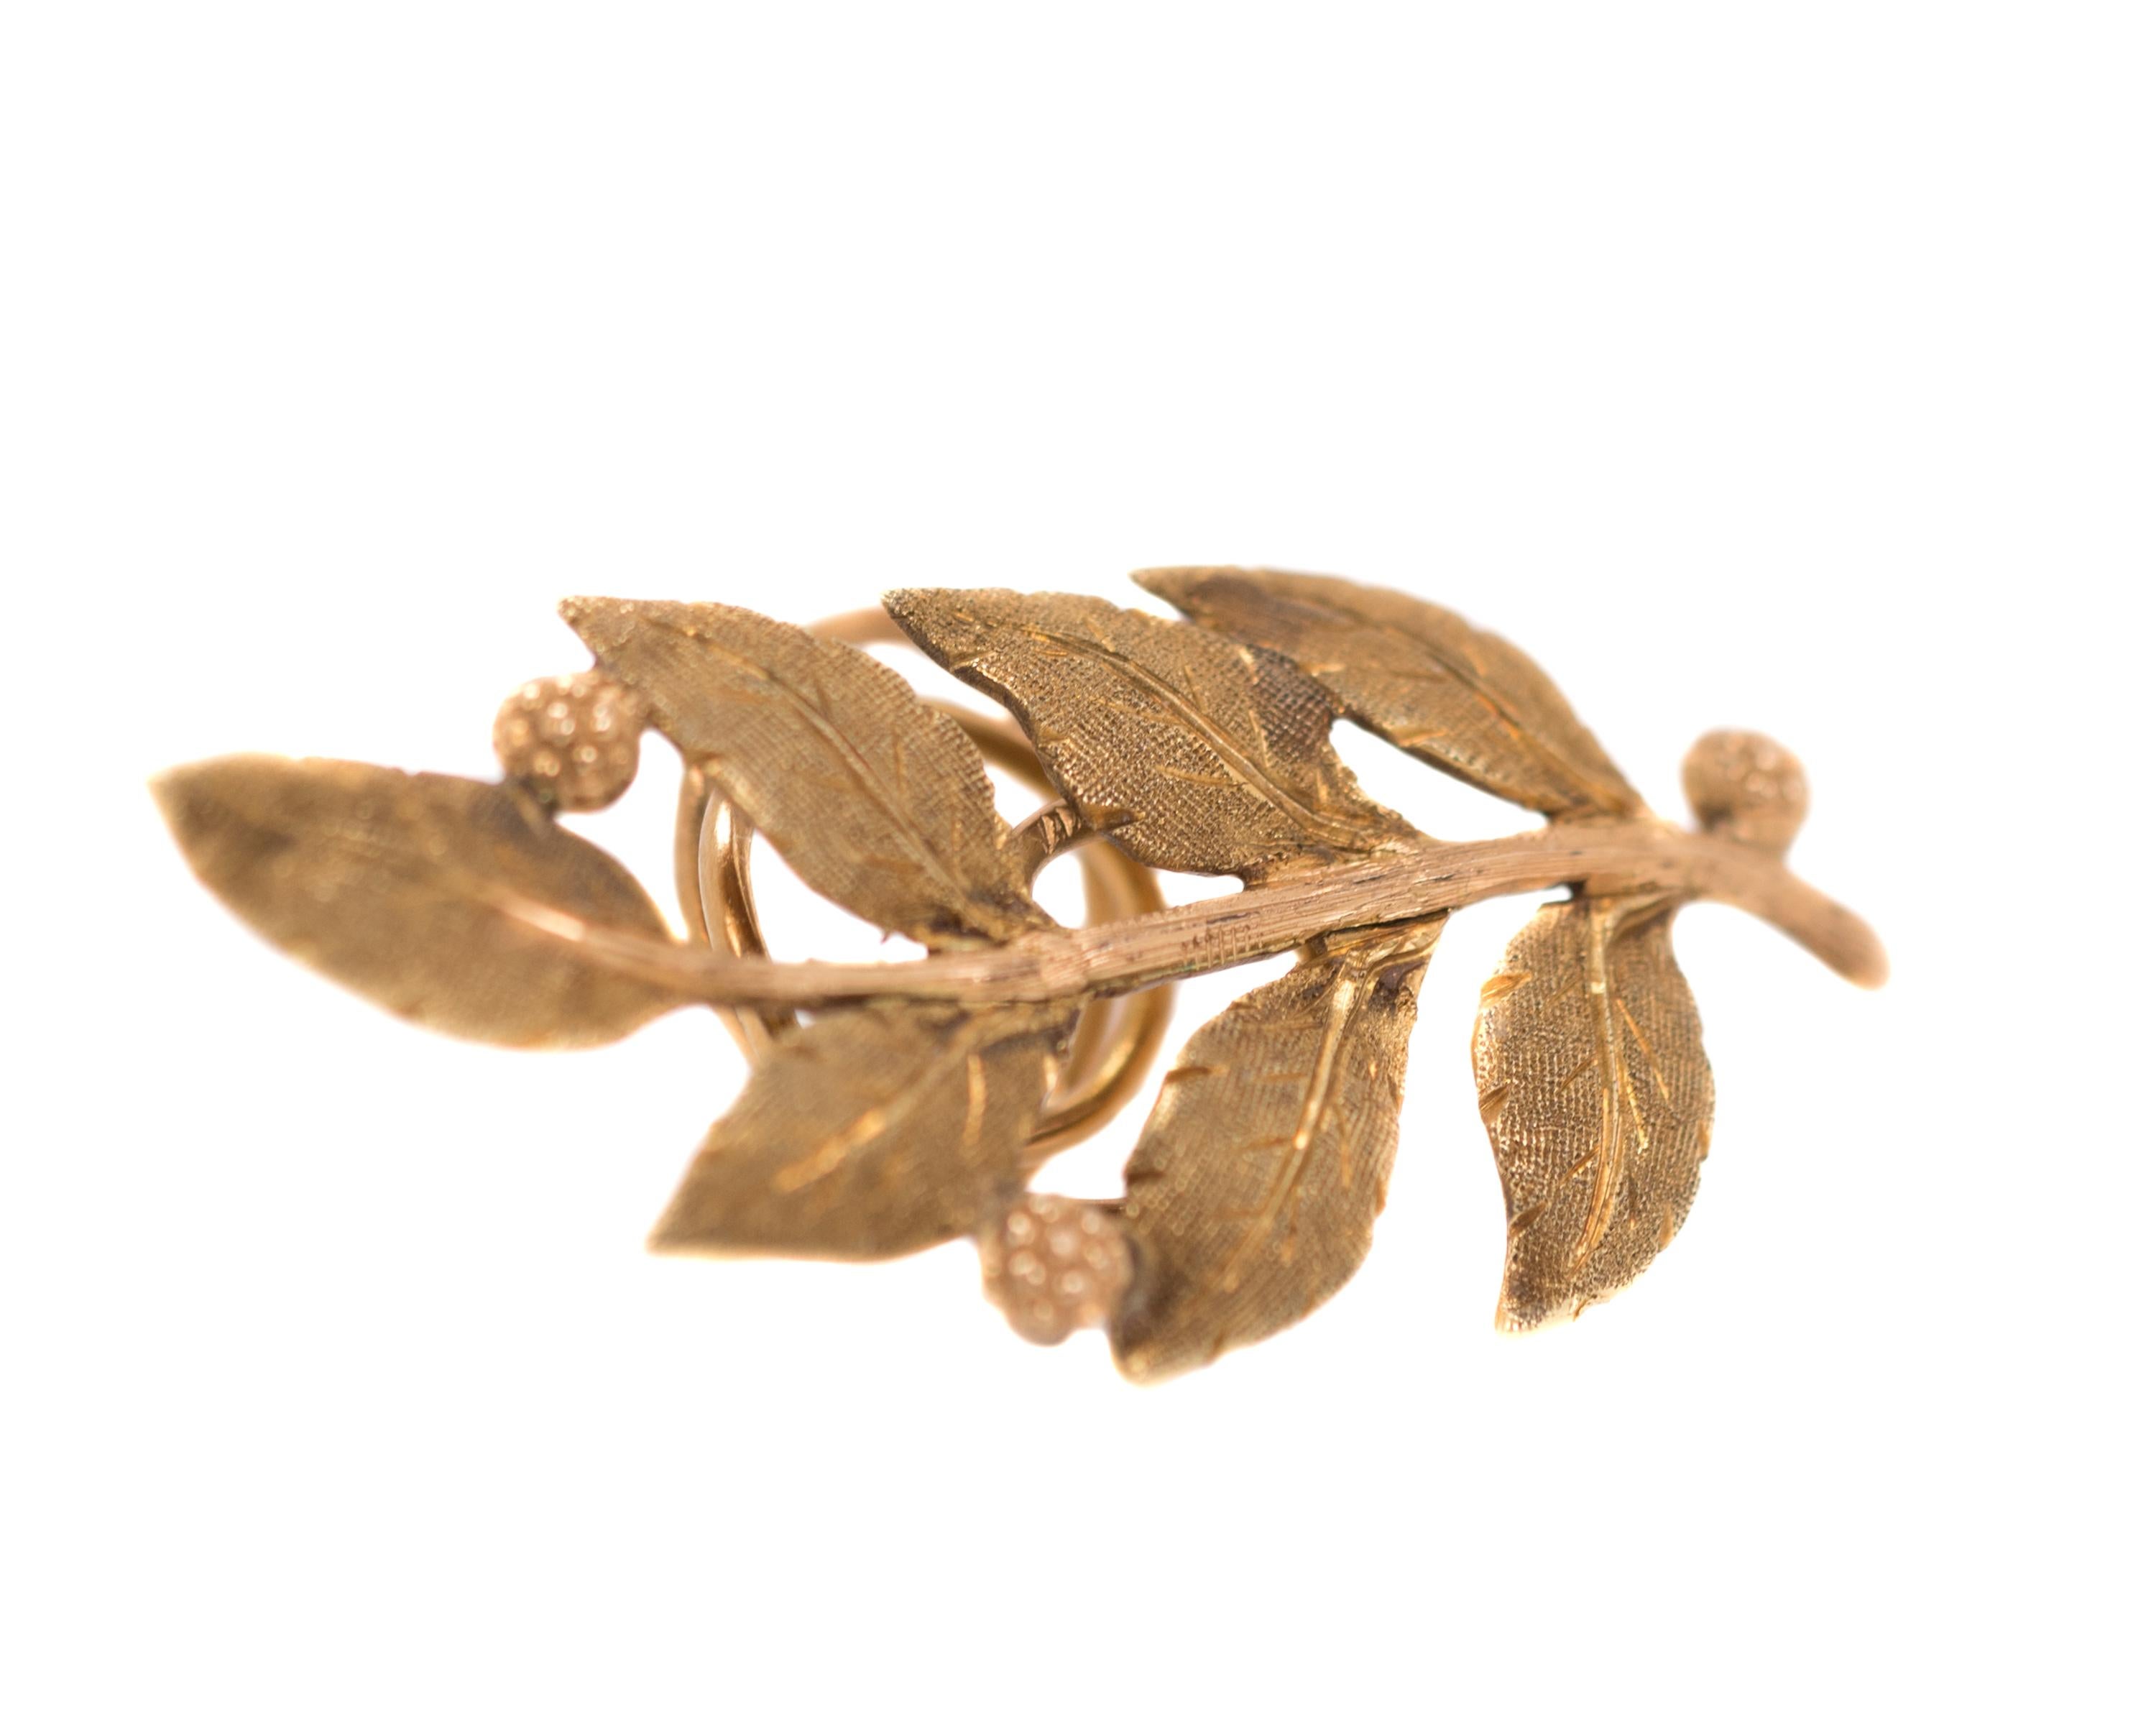 Mario Buccellati Leaf Lapel Pin / Brooch - 18 Karat Yellow Gold

Features:
Very rare corkscrew twist back
Rich 18 Karat Yellow Gold 
Finely detailed, textured leaves, branch, buds
Made in Italy

Dimensions 34 x 15 millmeters
Depth: 10